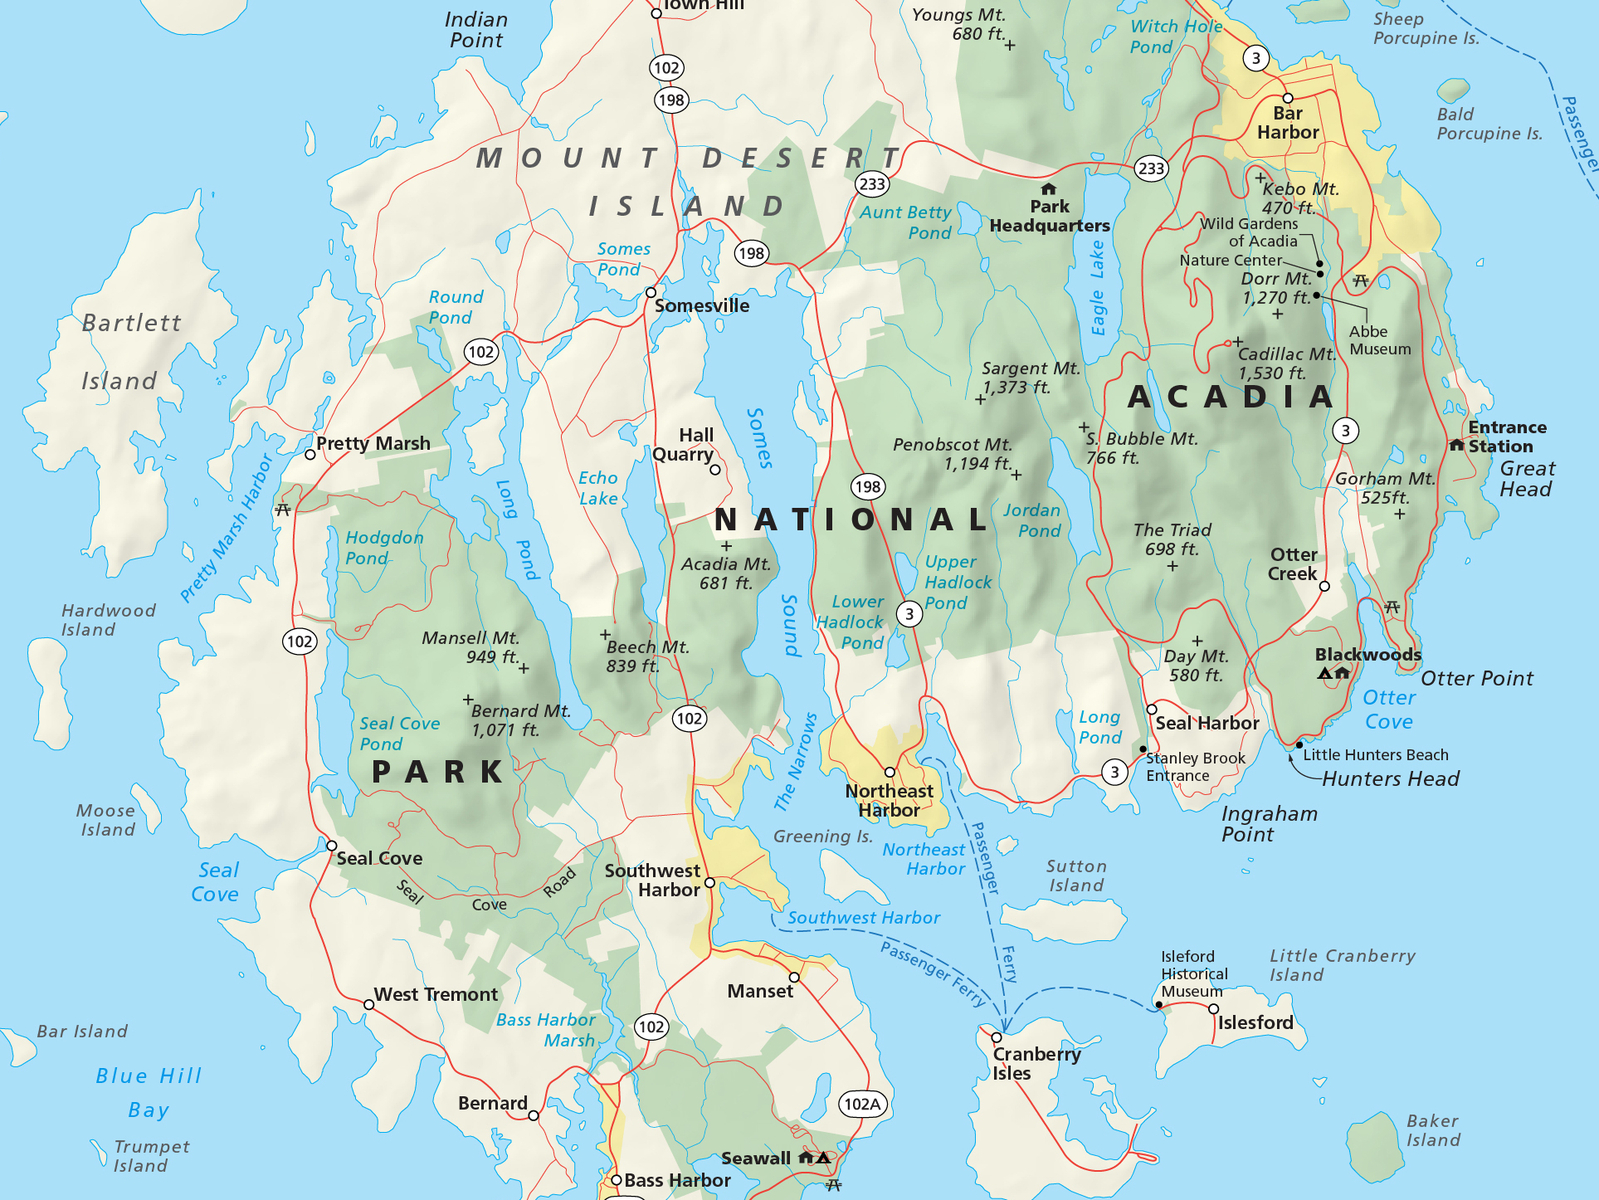 Acadia National Park Map by Aaron Taveras on Dribbble